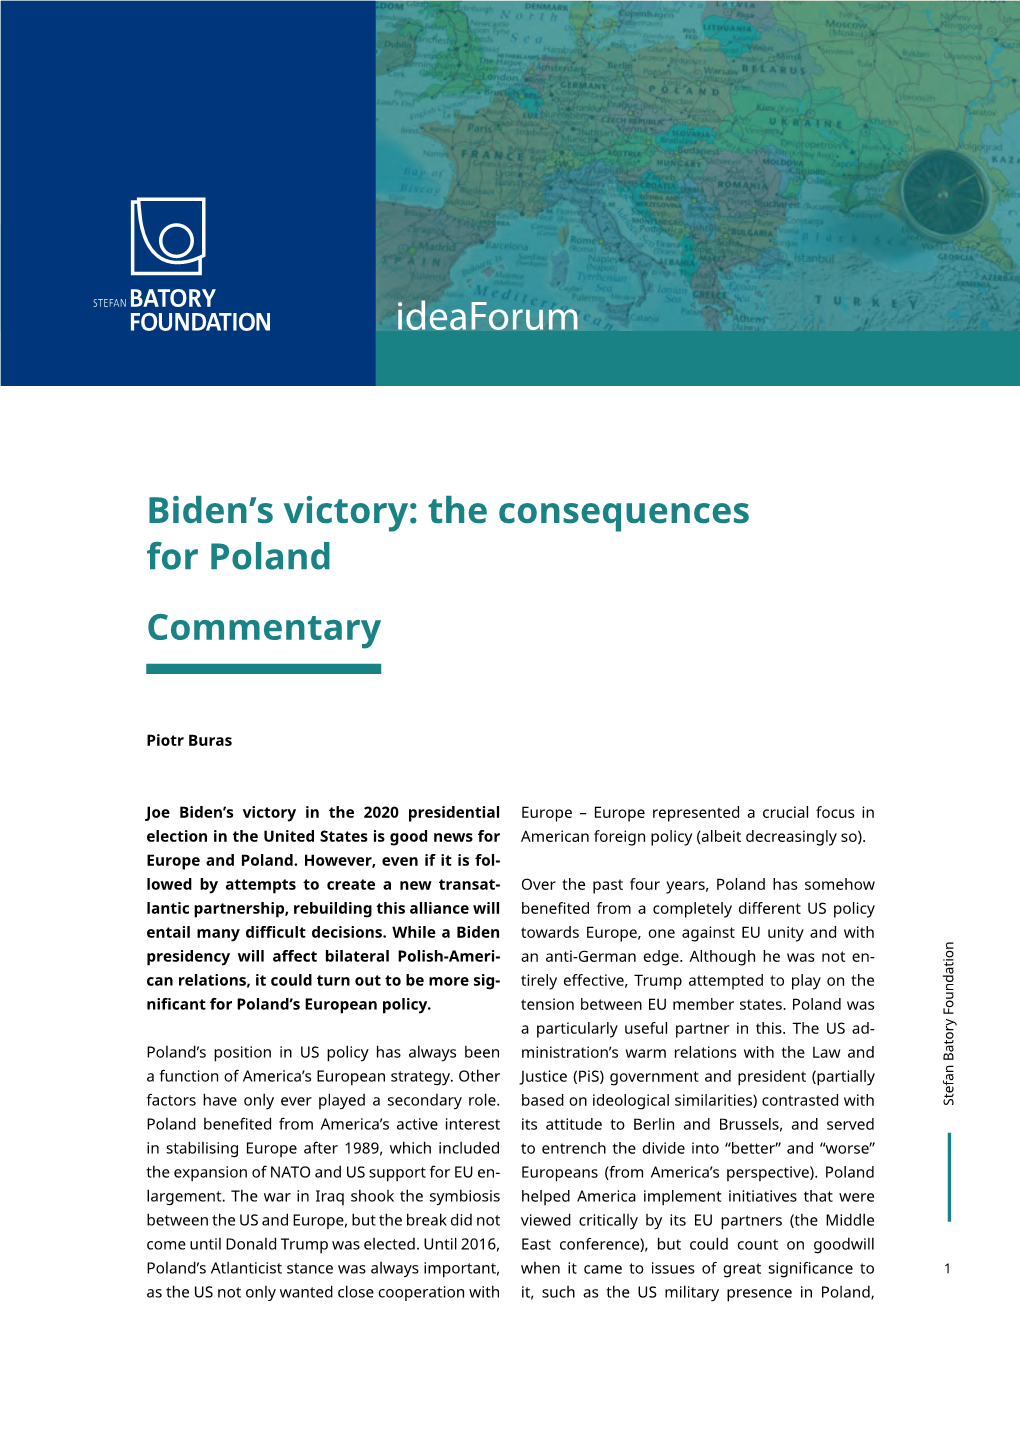 Biden's Victory: the Consequences for Poland Commentary